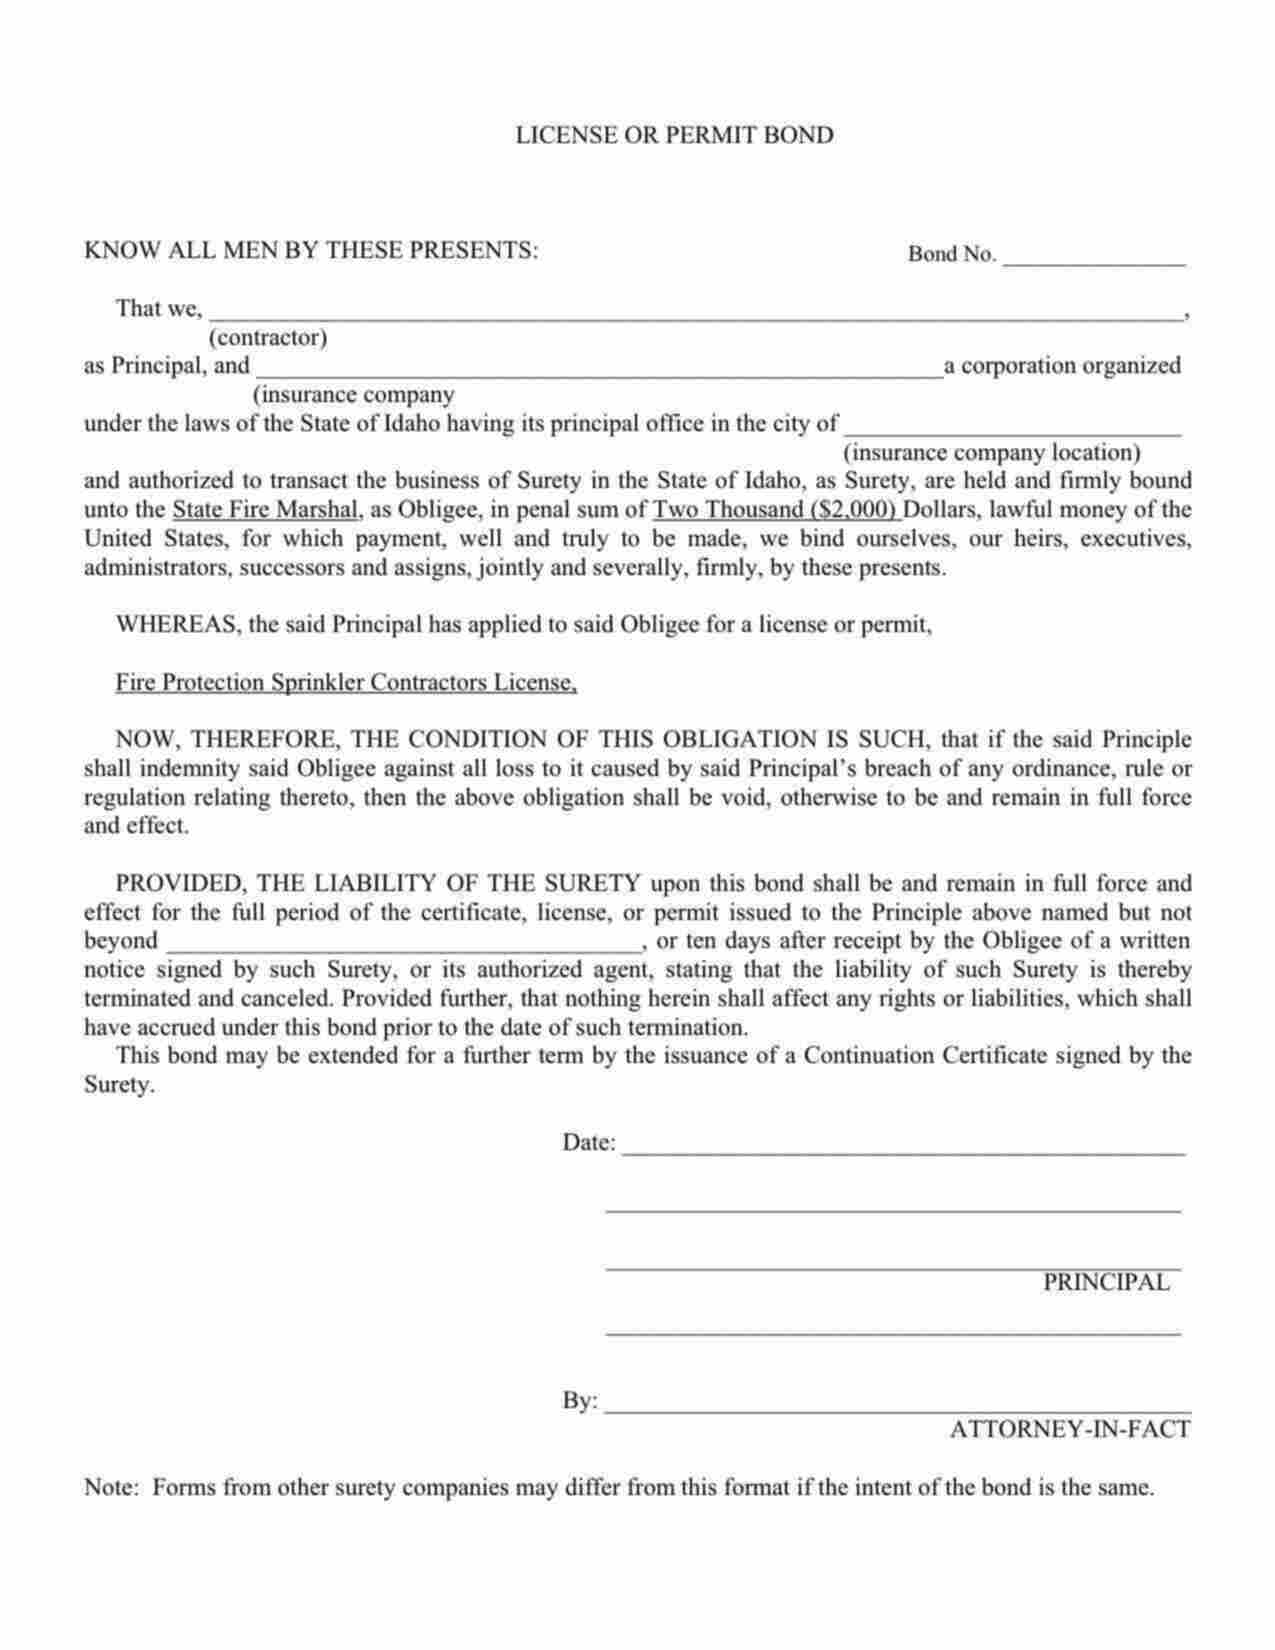 Idaho Fire Protection Sprinkler Contractor Bond Form